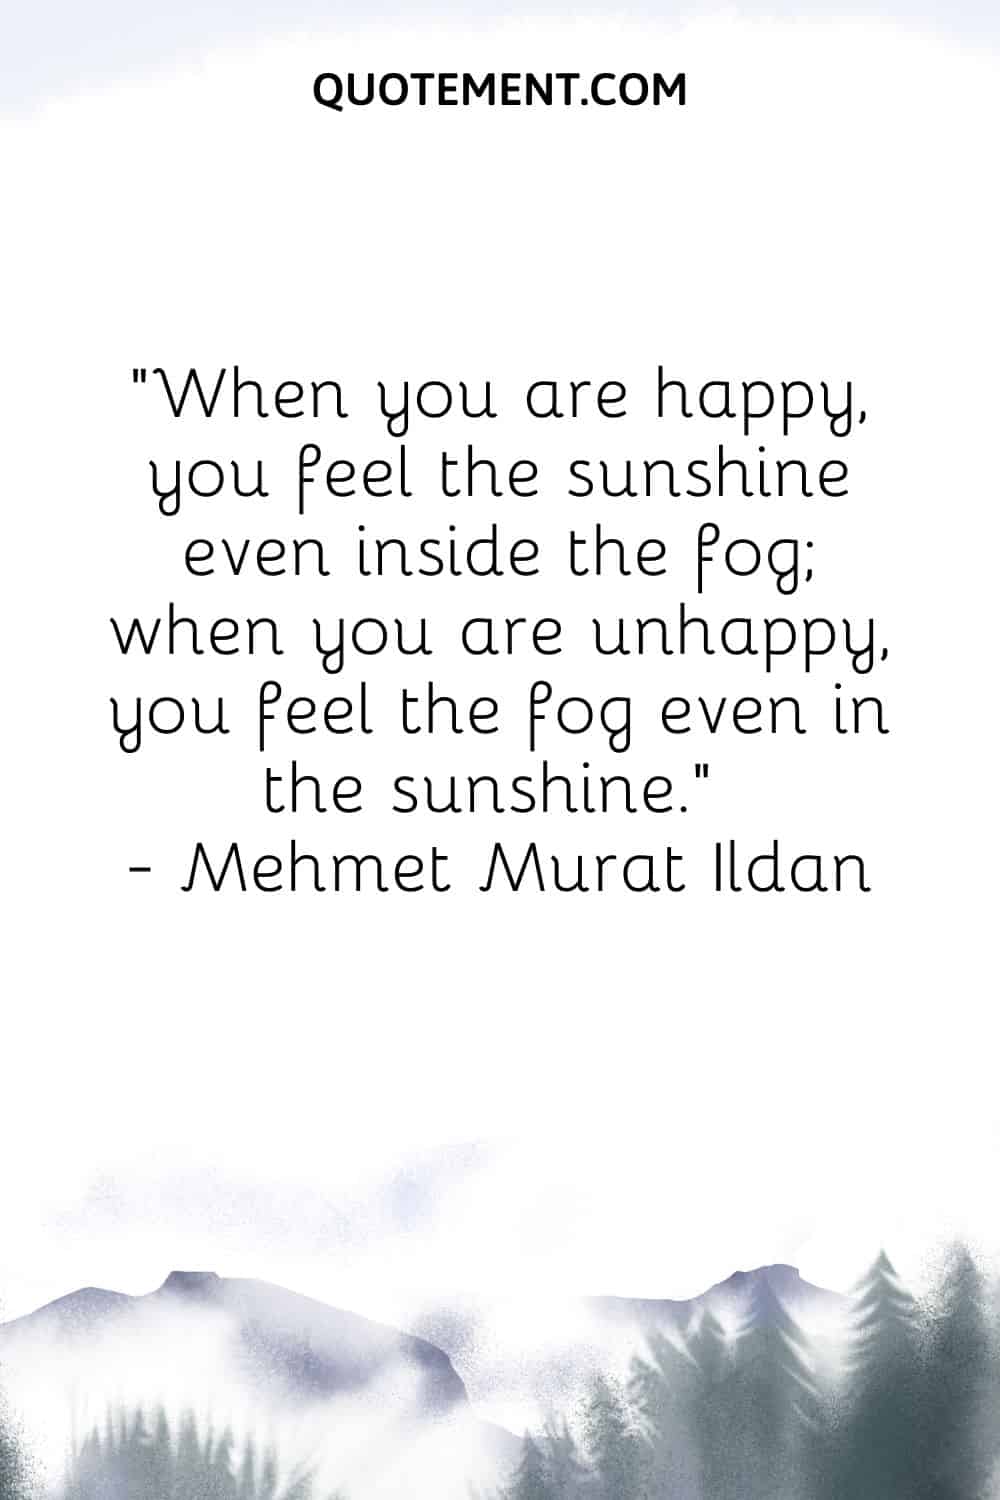 When you are happy, you feel the sunshine even inside the fog